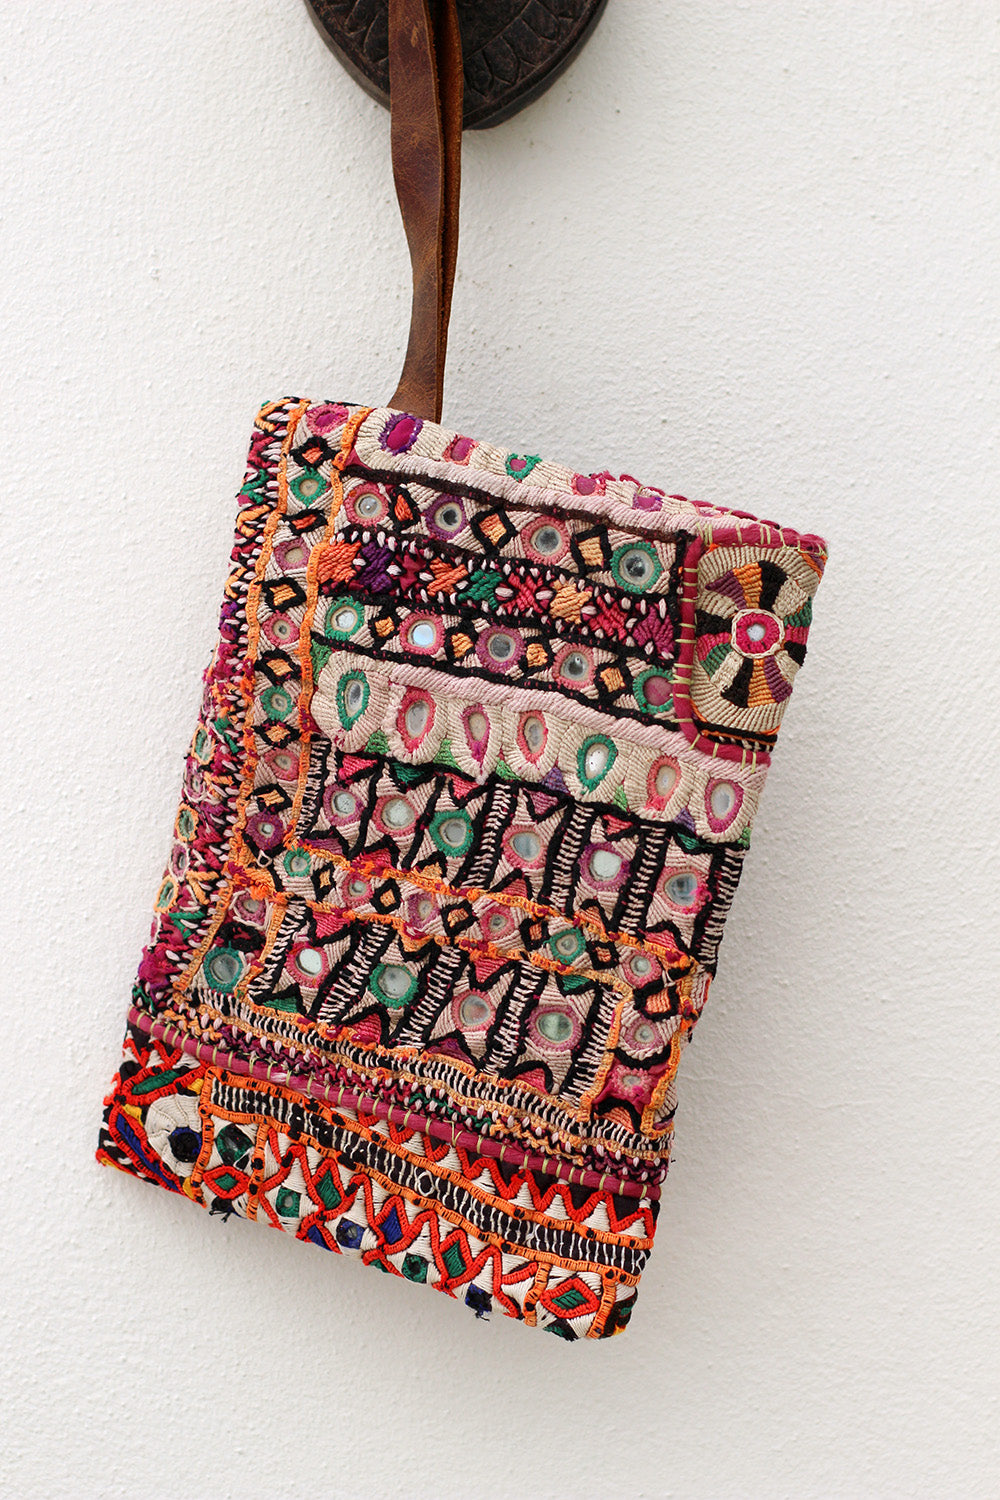 Boho Chic Vintage Embroidered Clutch Bag with Leather Strap